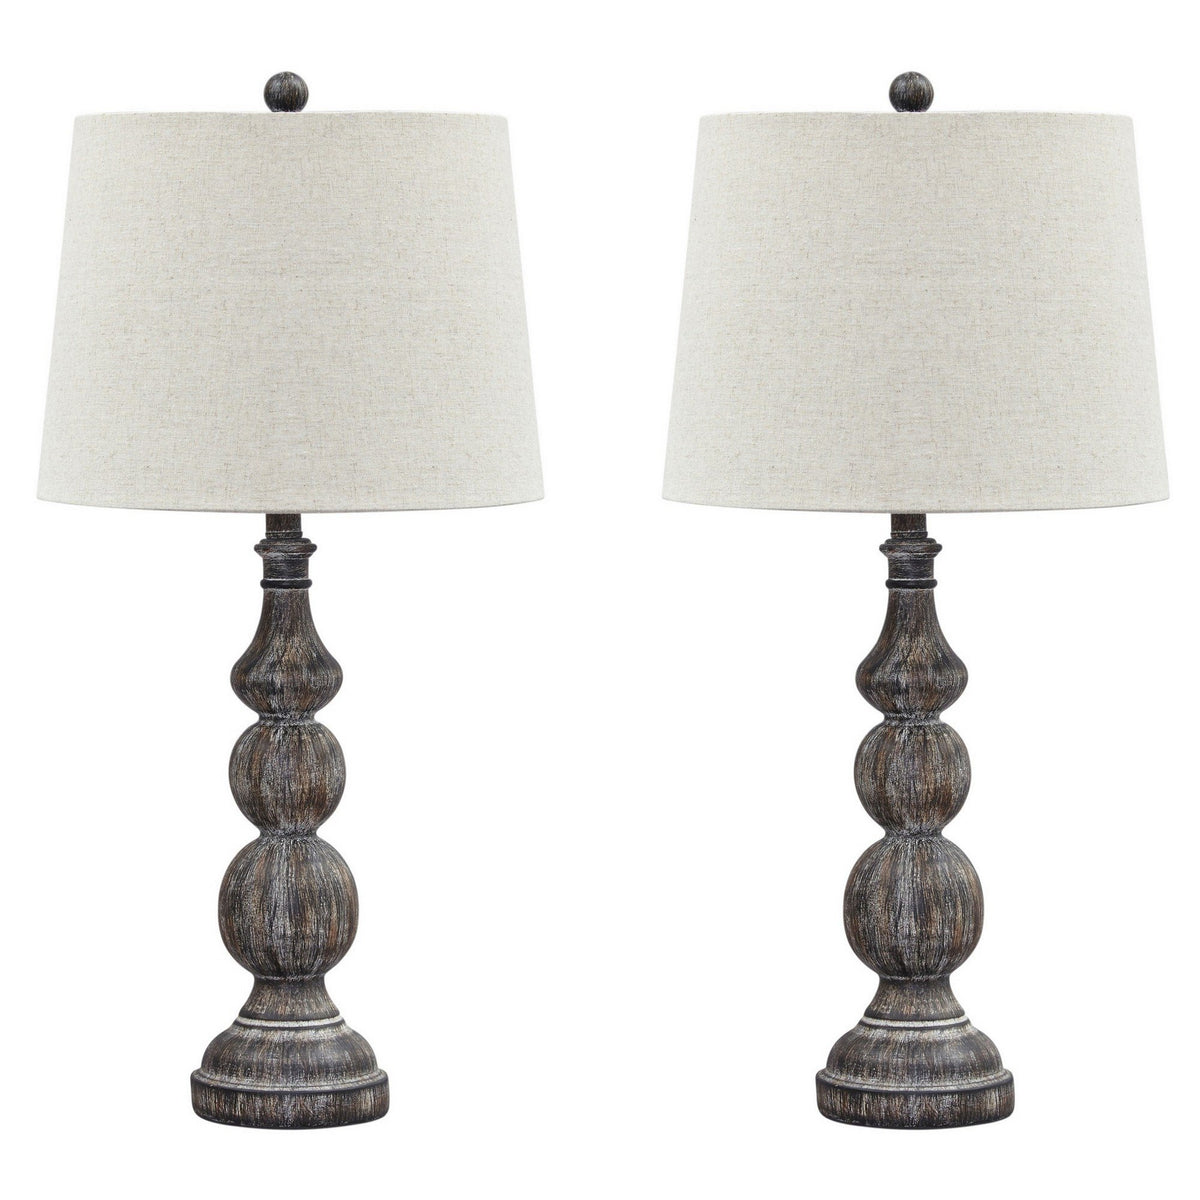 Polyresin Table Lamp with Turned Base, Set of 2, Brown and Off White - BM230958